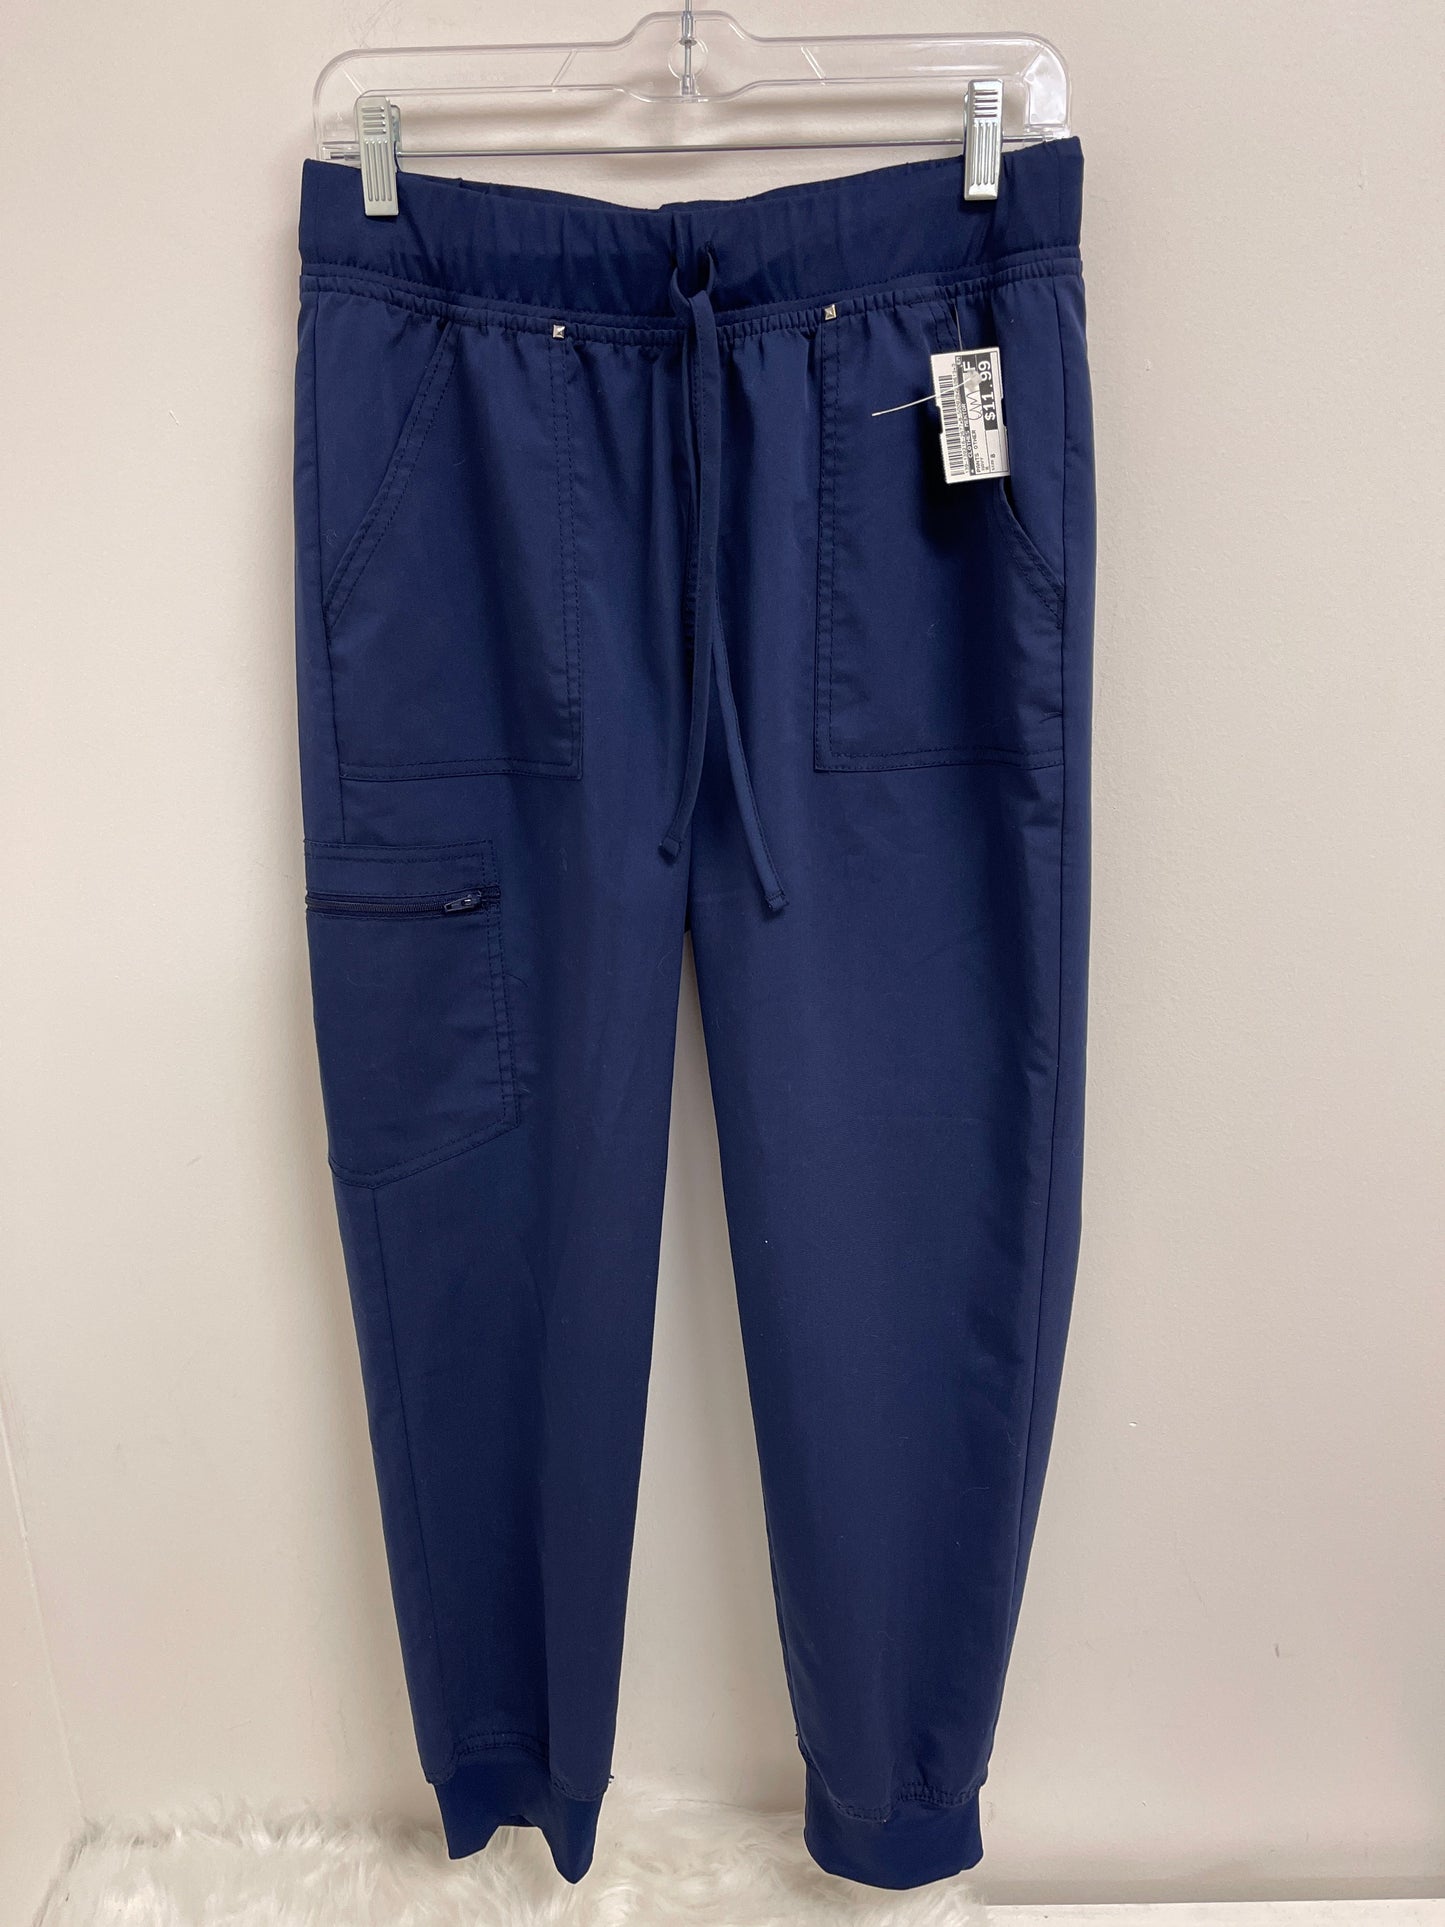 Navy Pants Other Clothes Mentor, Size 8